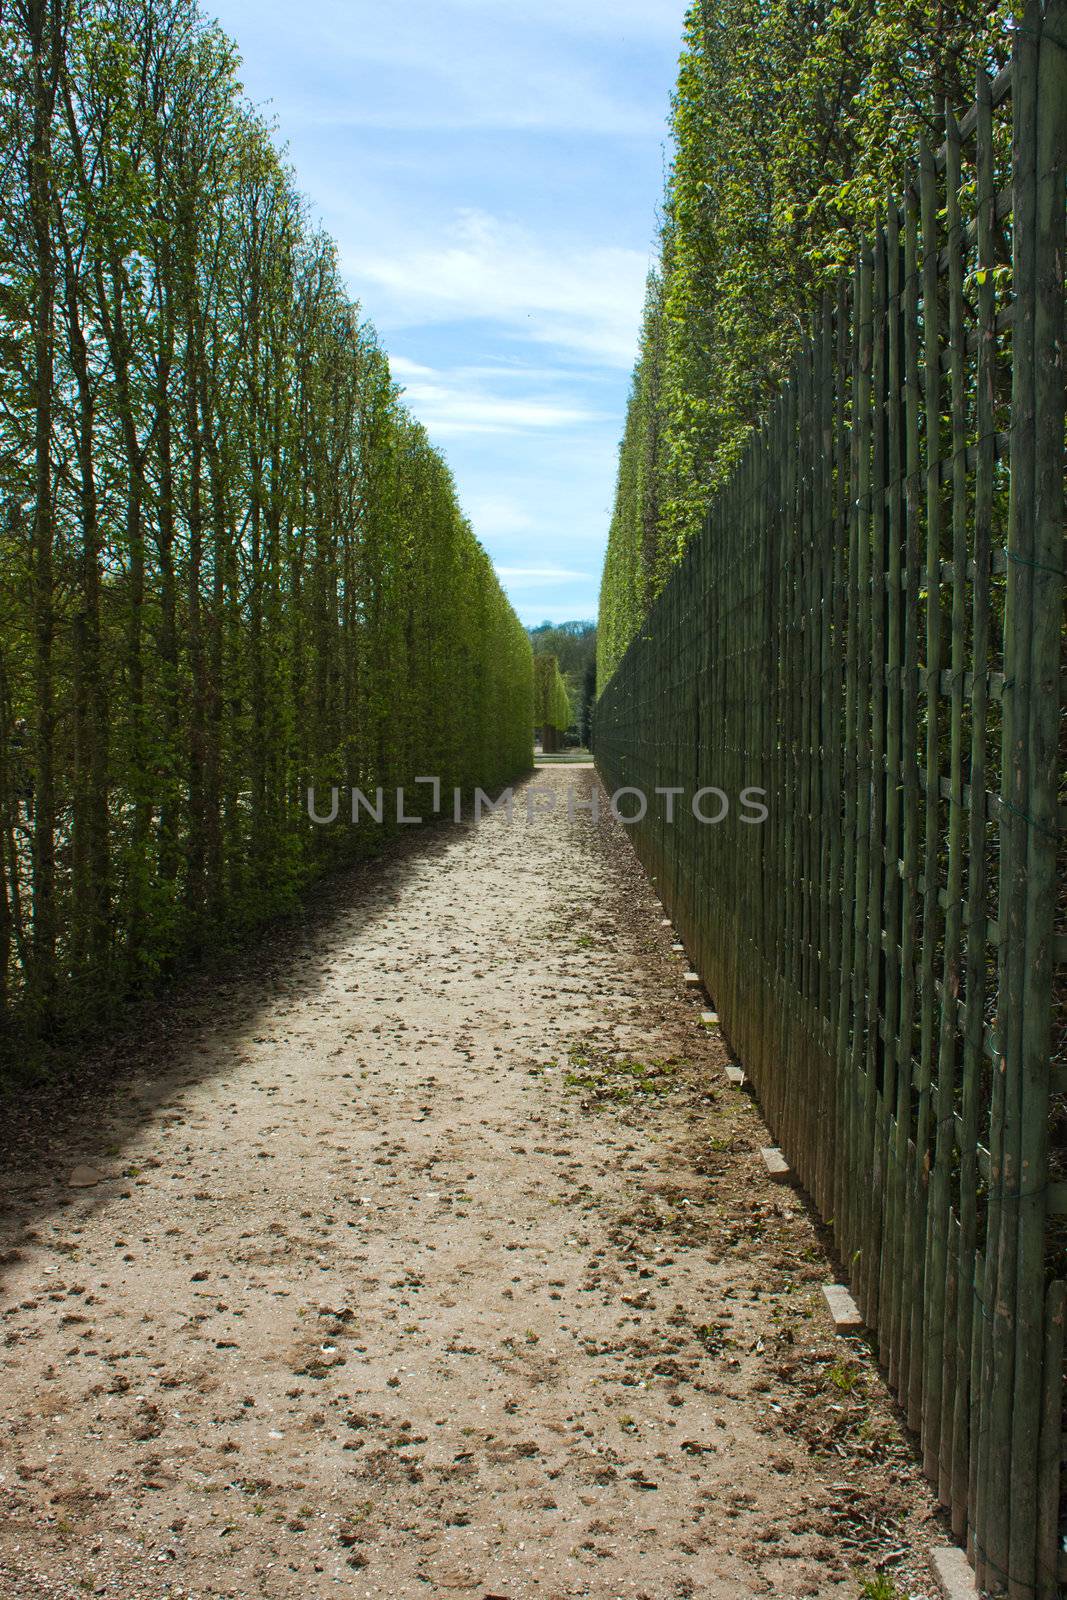 A nice and peaceful path in the gardens of Versailles in France